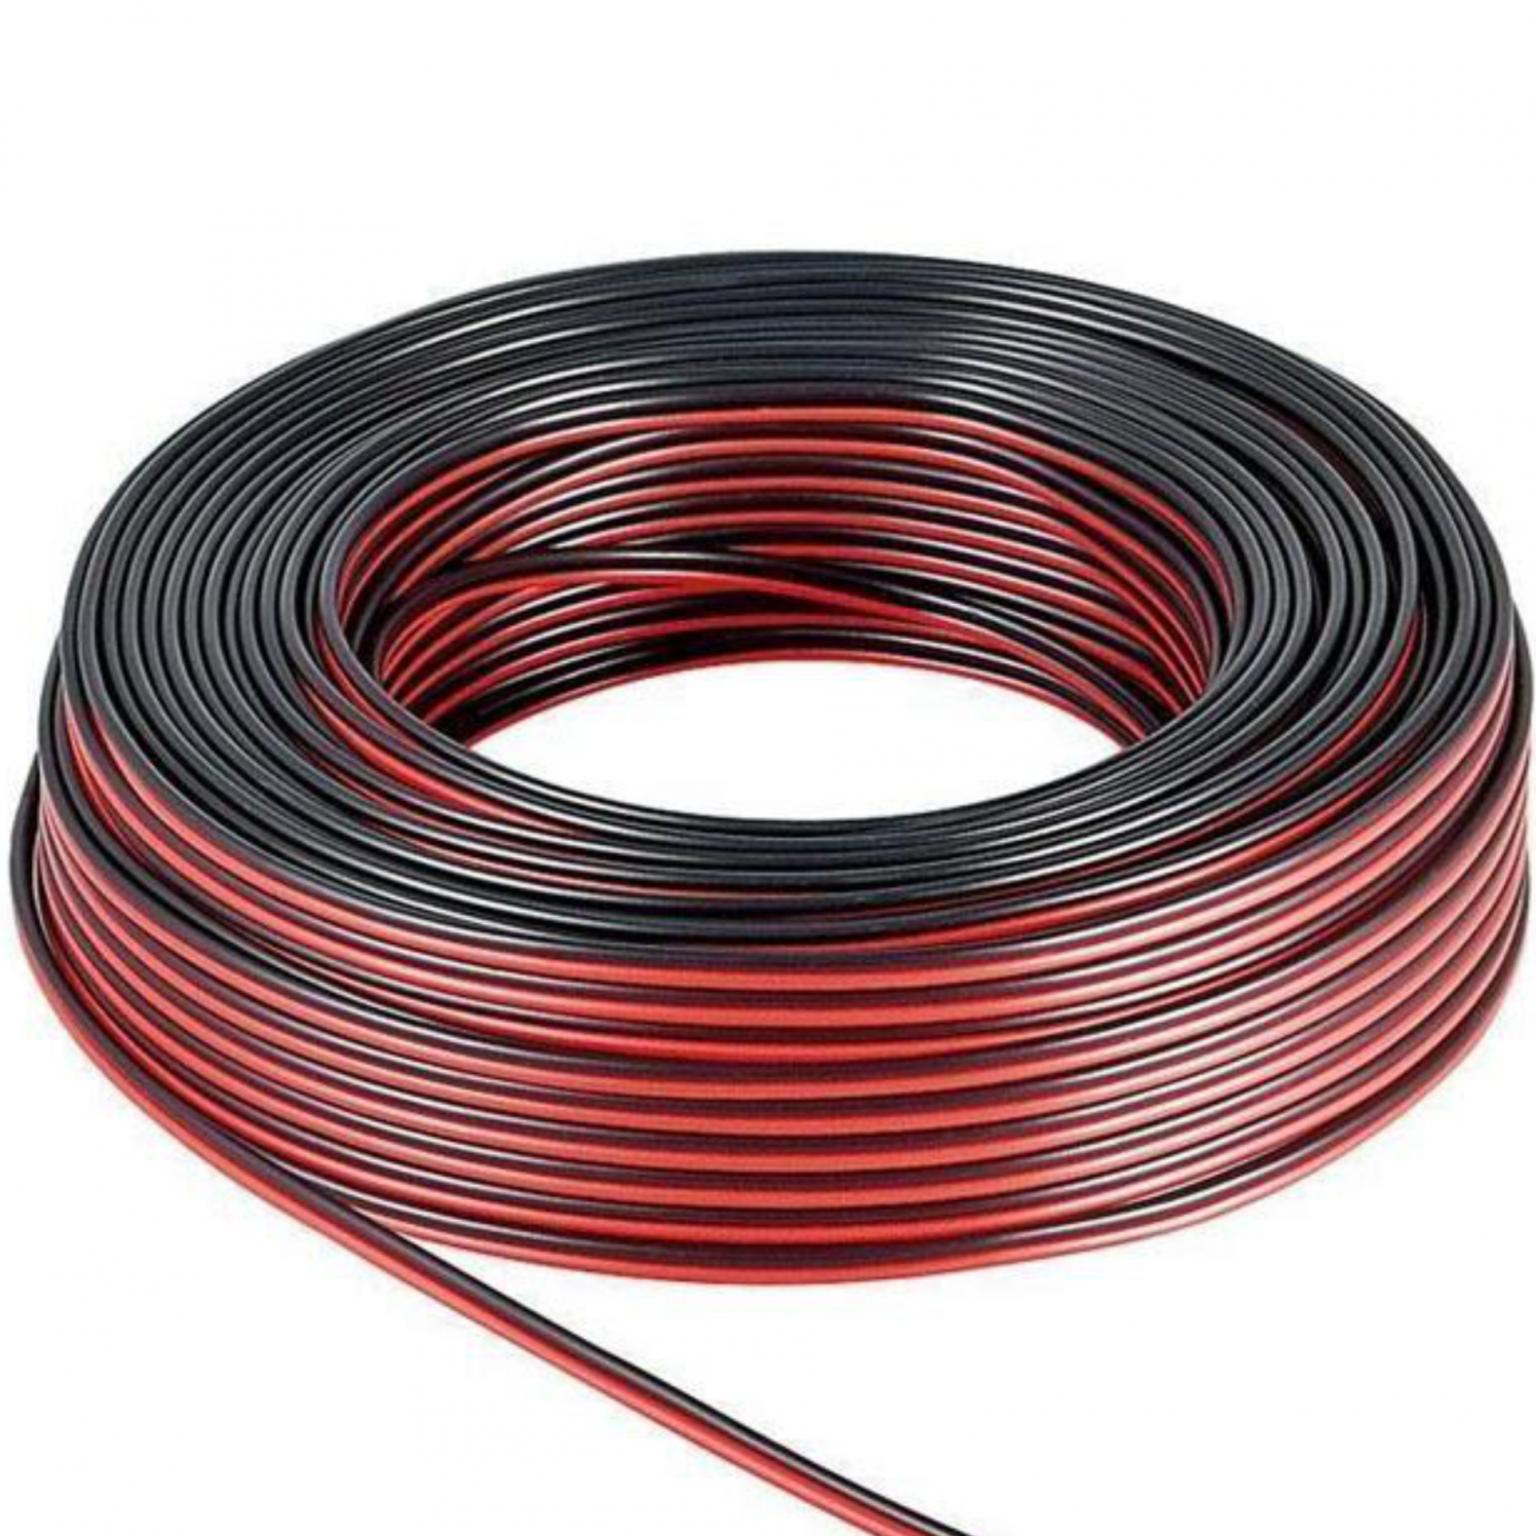 Image of Speaker cable red/black 100 m spool, cable diameter 2 x 0,75 mm? - Goo